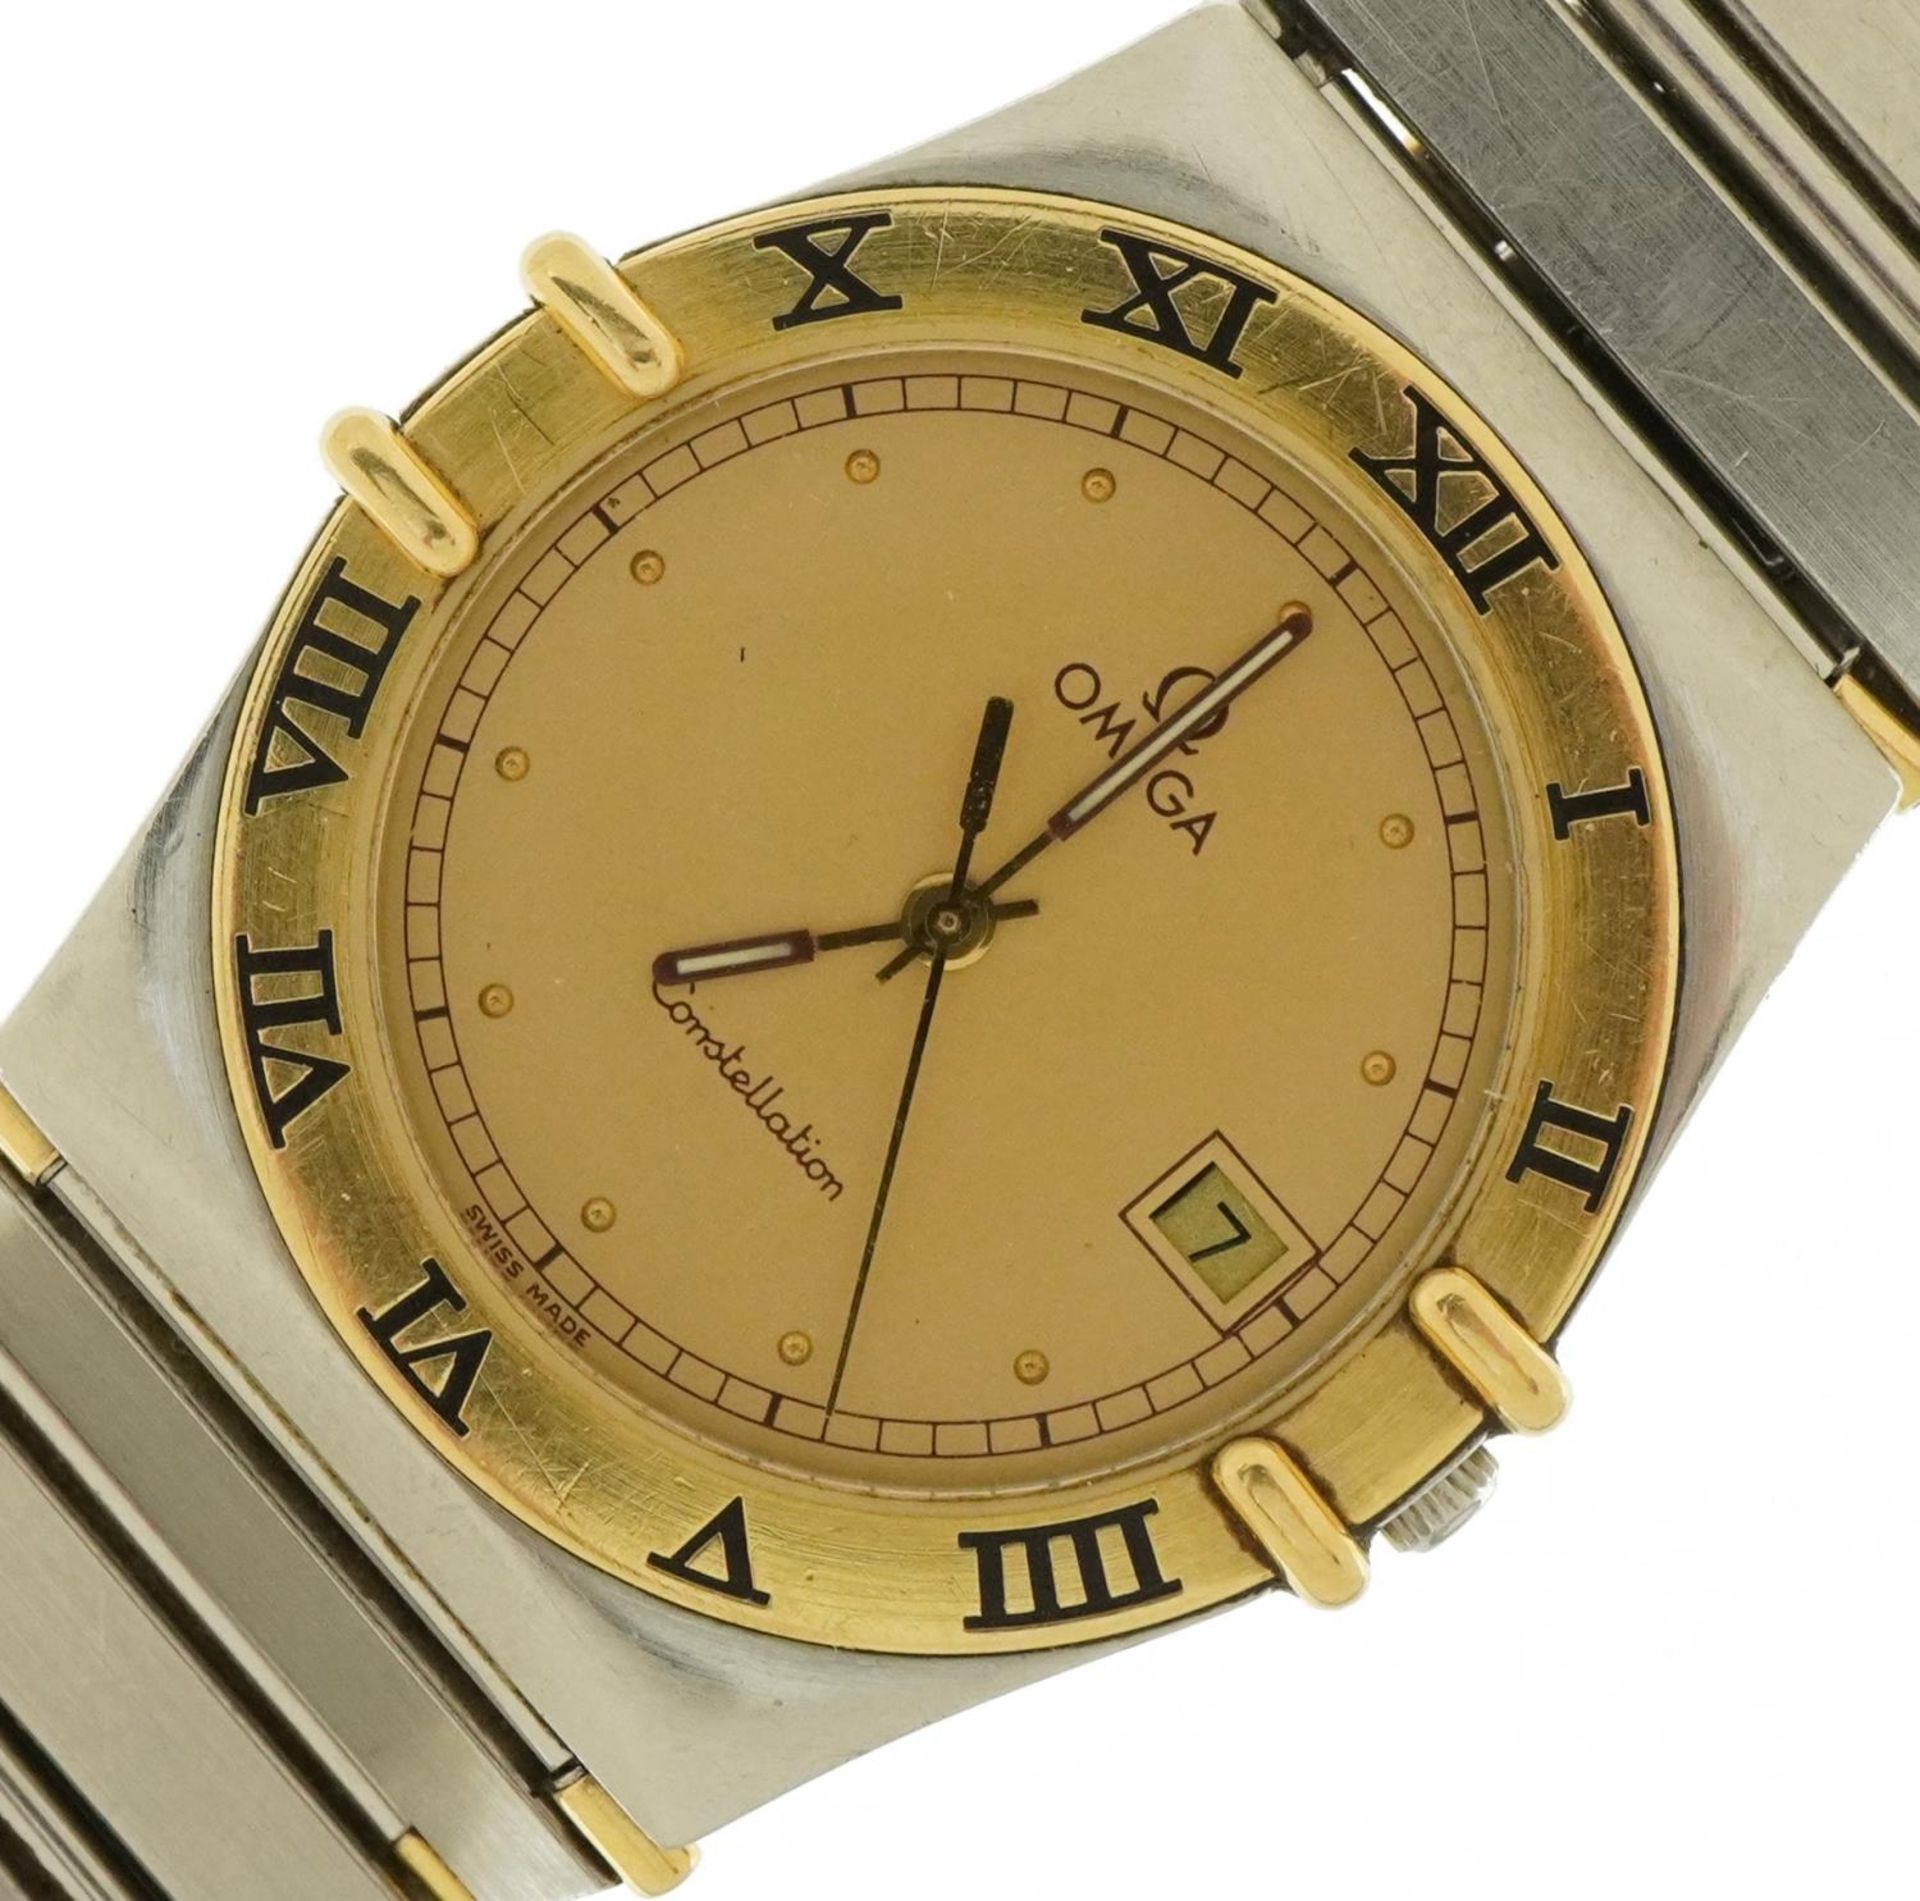 Omega, gentlemen's Omega Constellation wristwatch with date aperture, the case numbered 53334611,